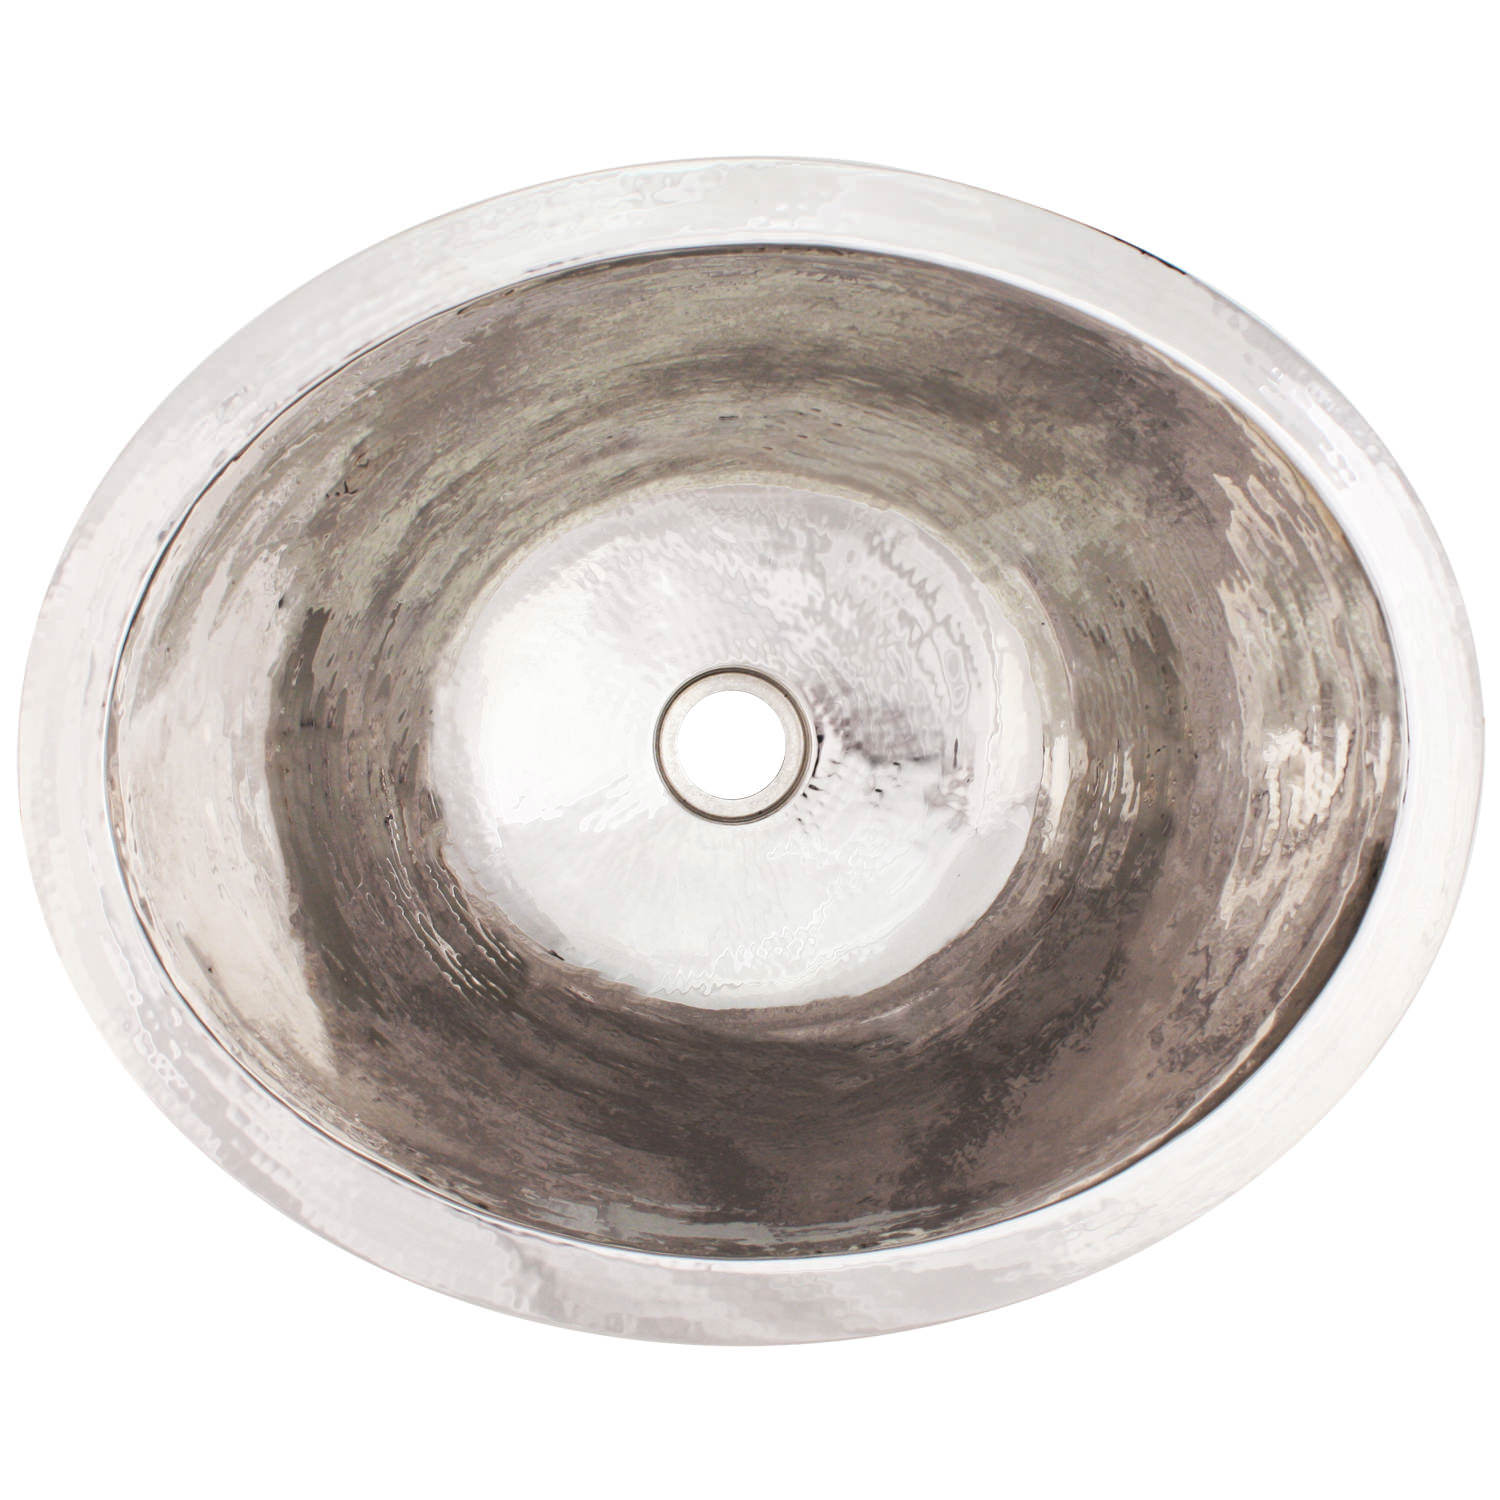 Linkasink Bathroom Sinks - Copper (Nickel Plate) - C023 PN Small Oval - 17.5 x 14 x 7 with 1.5" Drain Hole - Polished Nickel